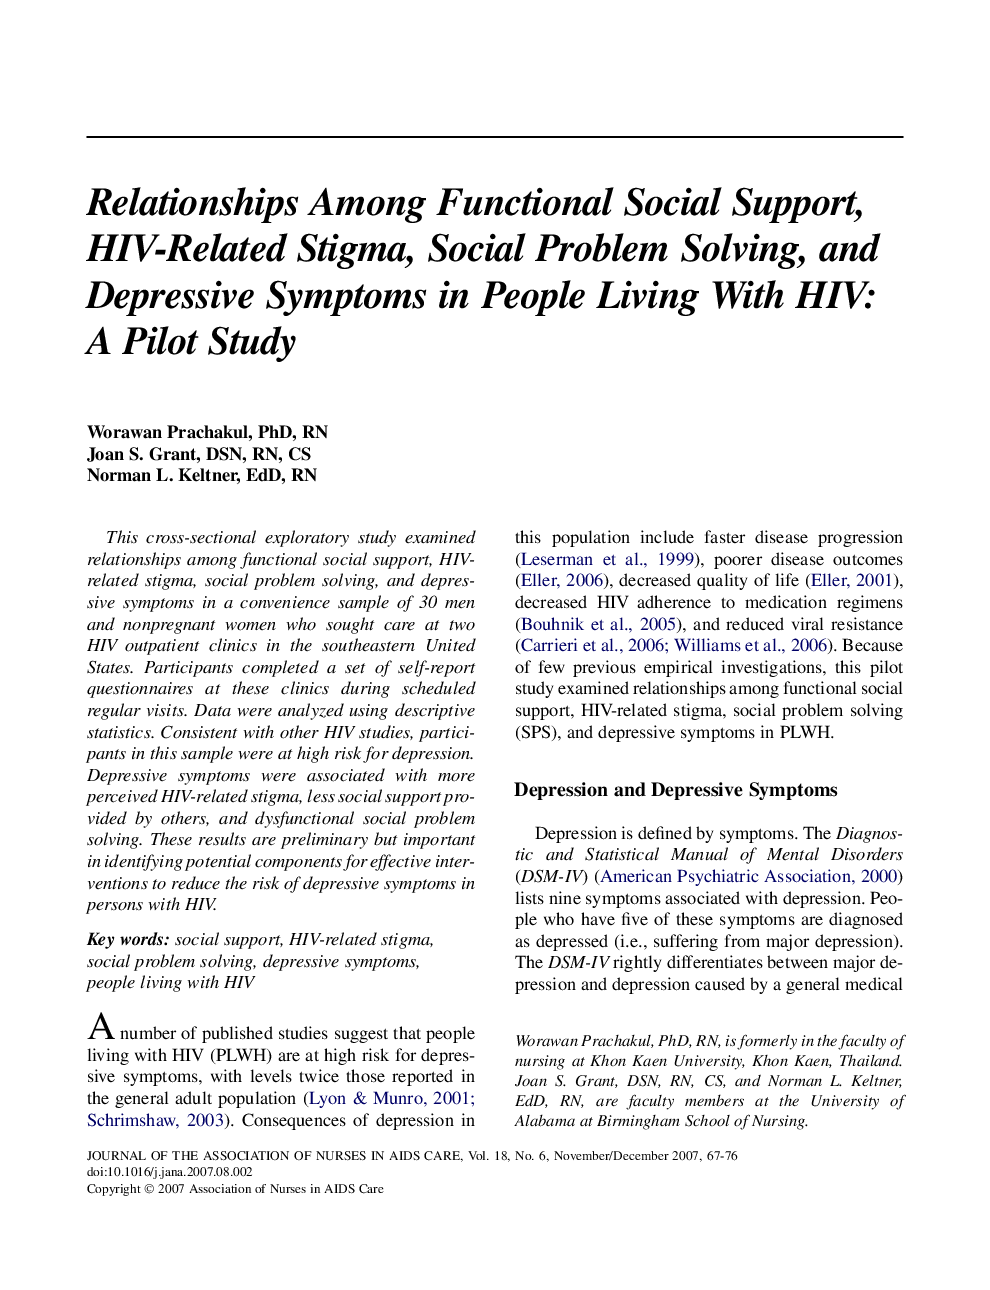 Relationships Among Functional Social Support, HIV-Related Stigma, Social Problem Solving, and Depressive Symptoms in People Living With HIV: A Pilot Study